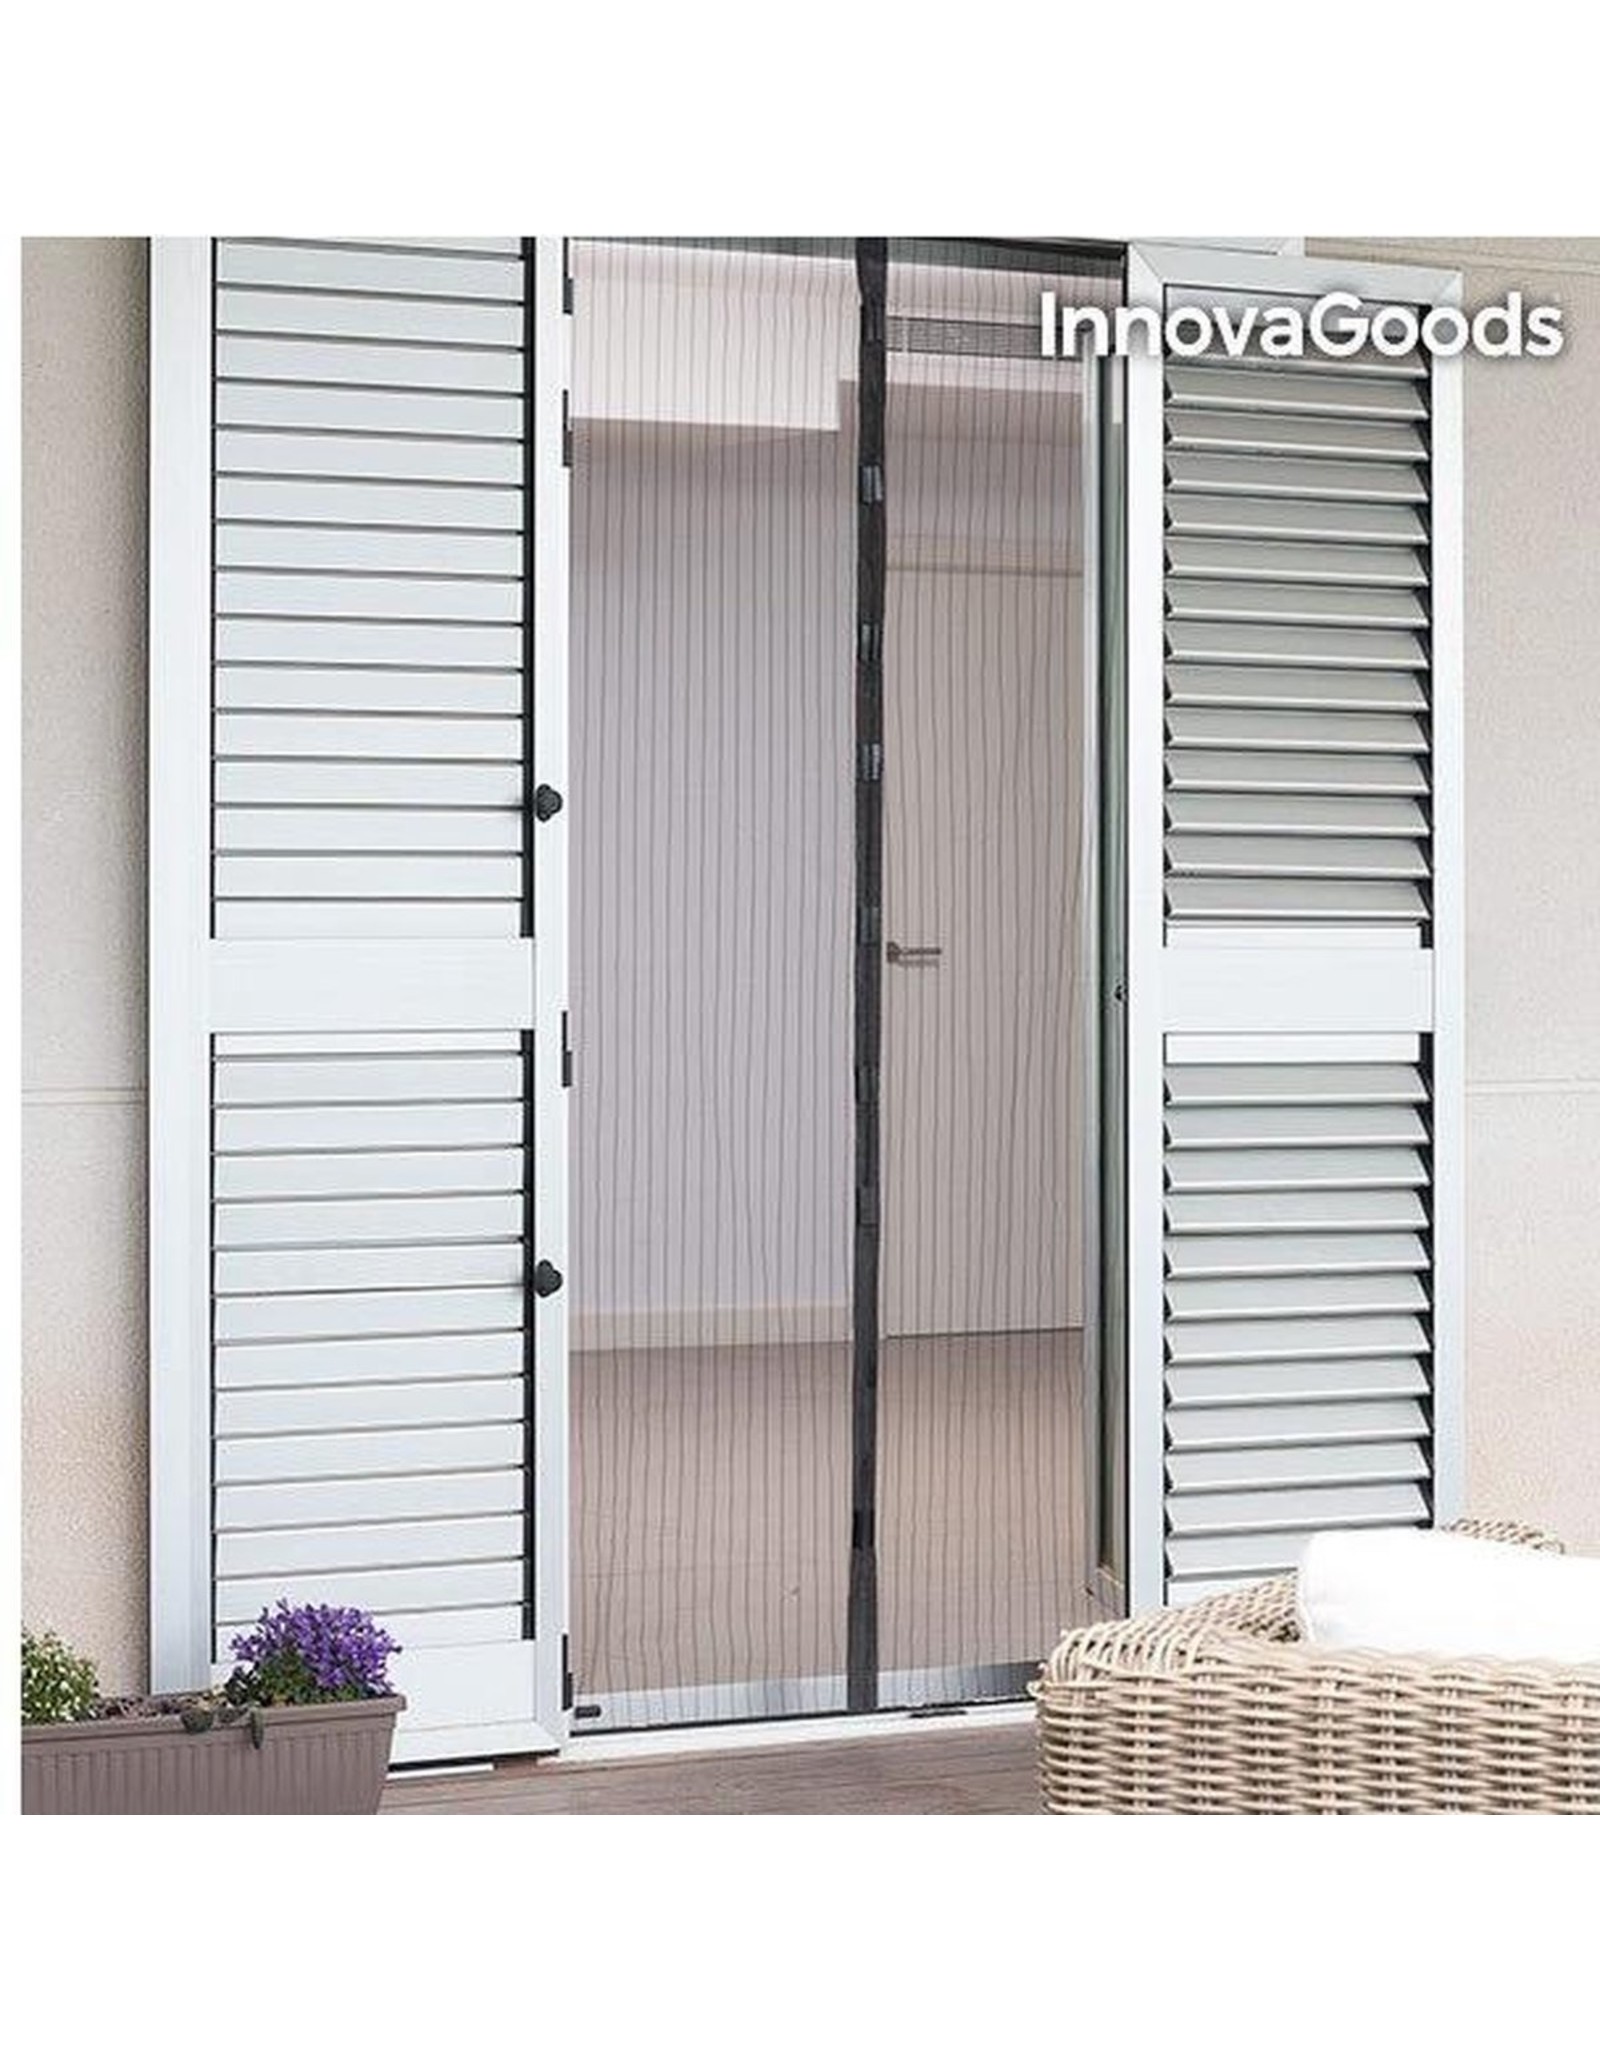 InnovaGoods Innovagoods - Magnetic fly screen